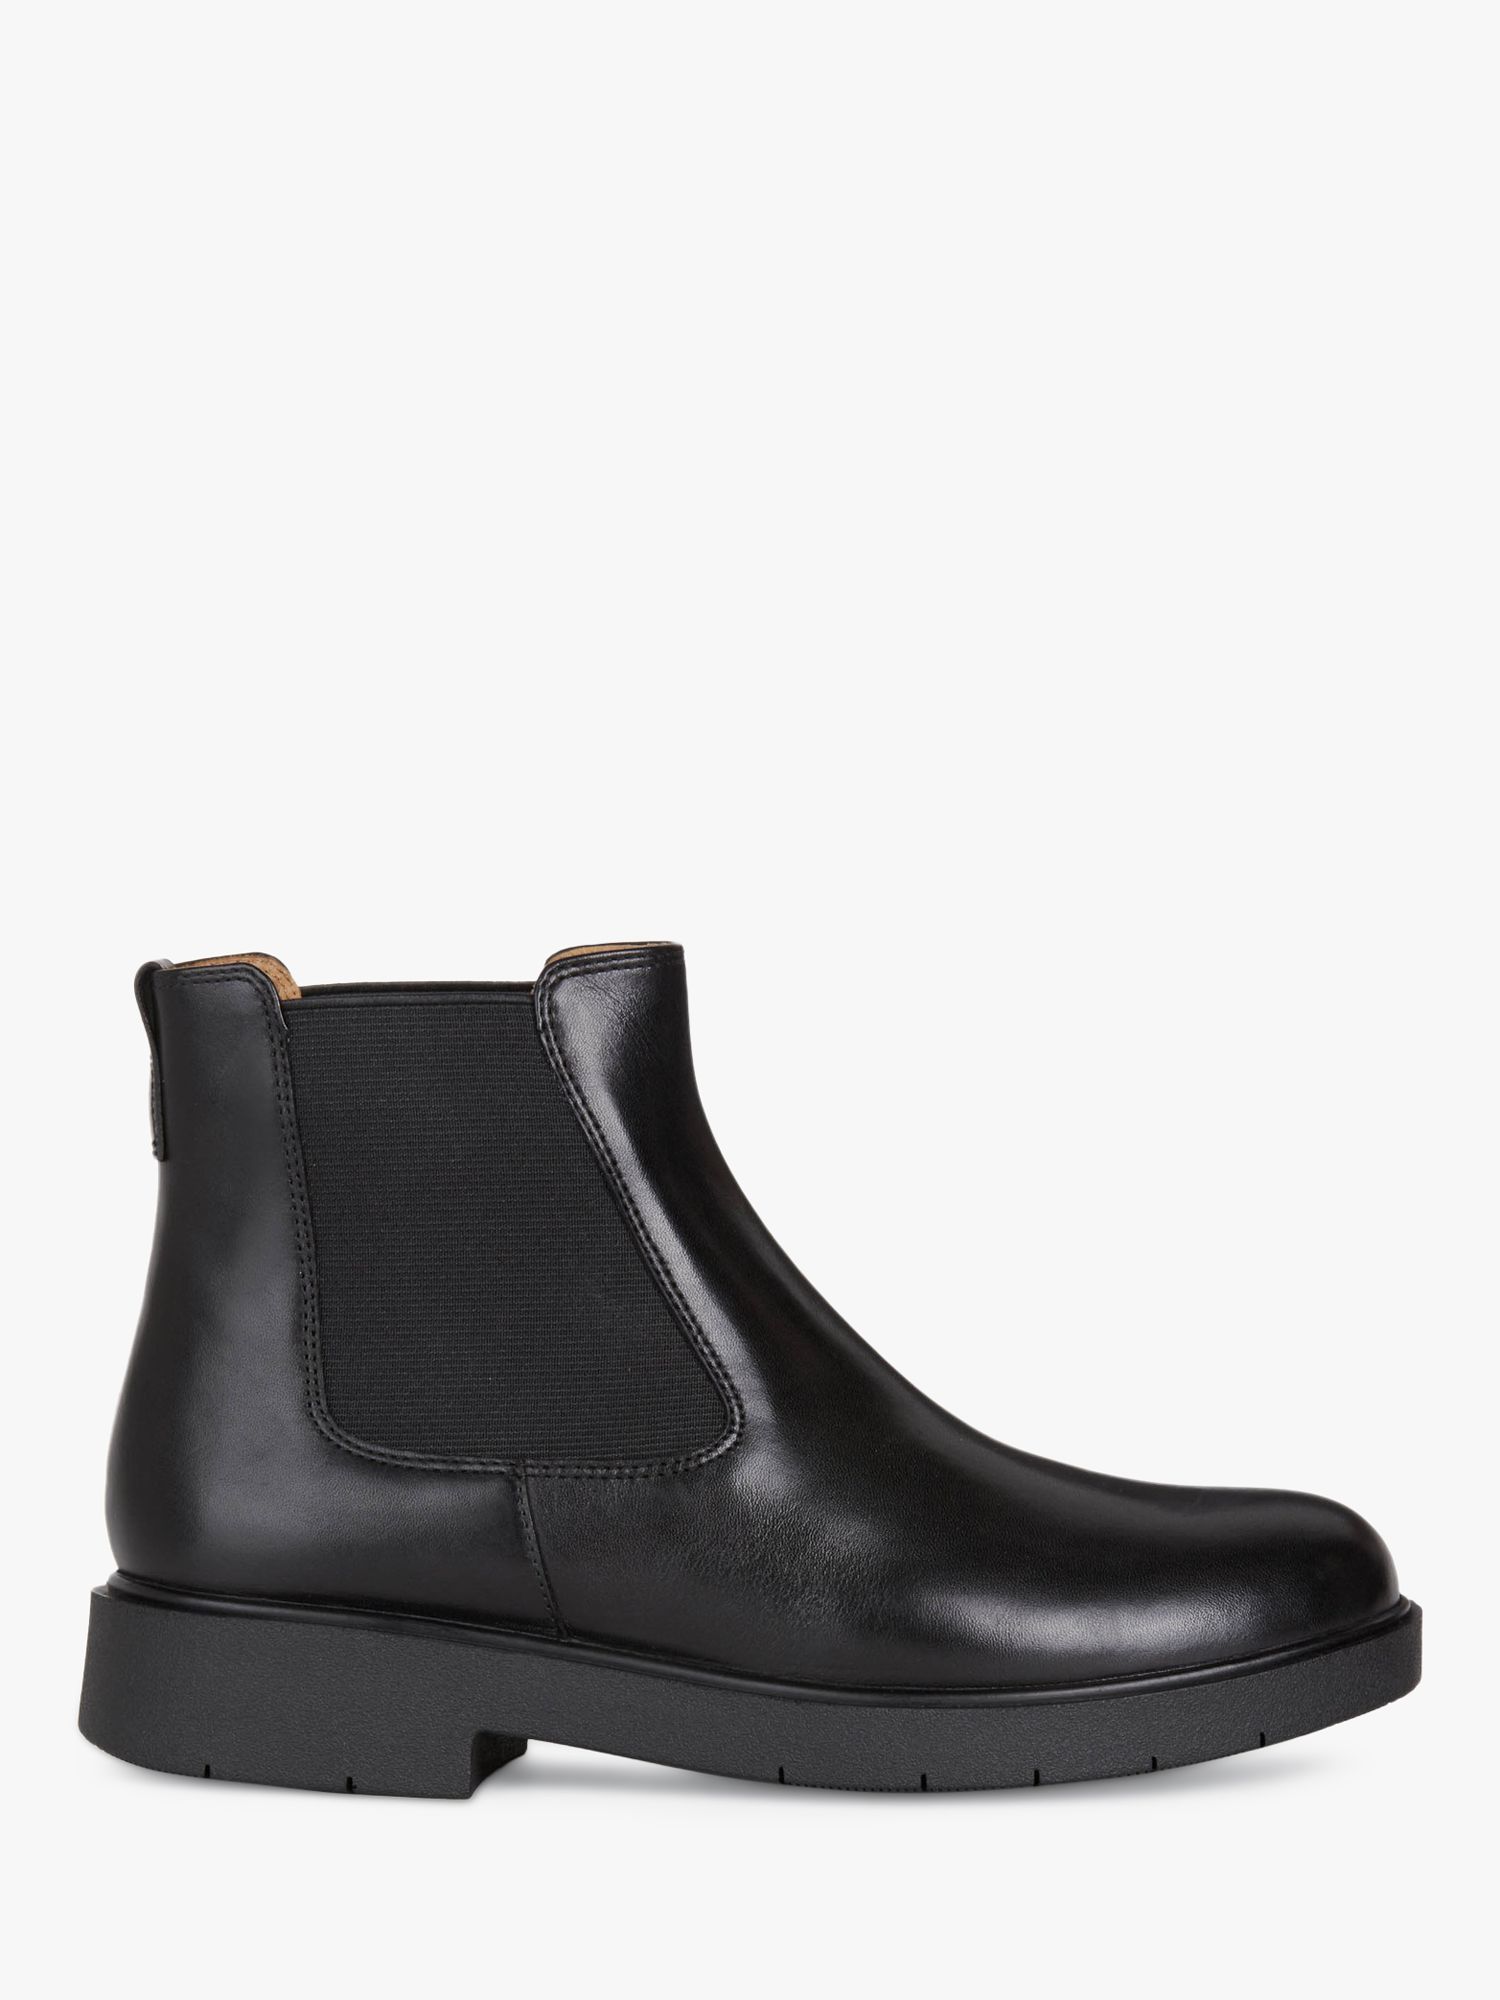 D Spherica Fit Leather Ankle Boots, Black at John Lewis & Partners